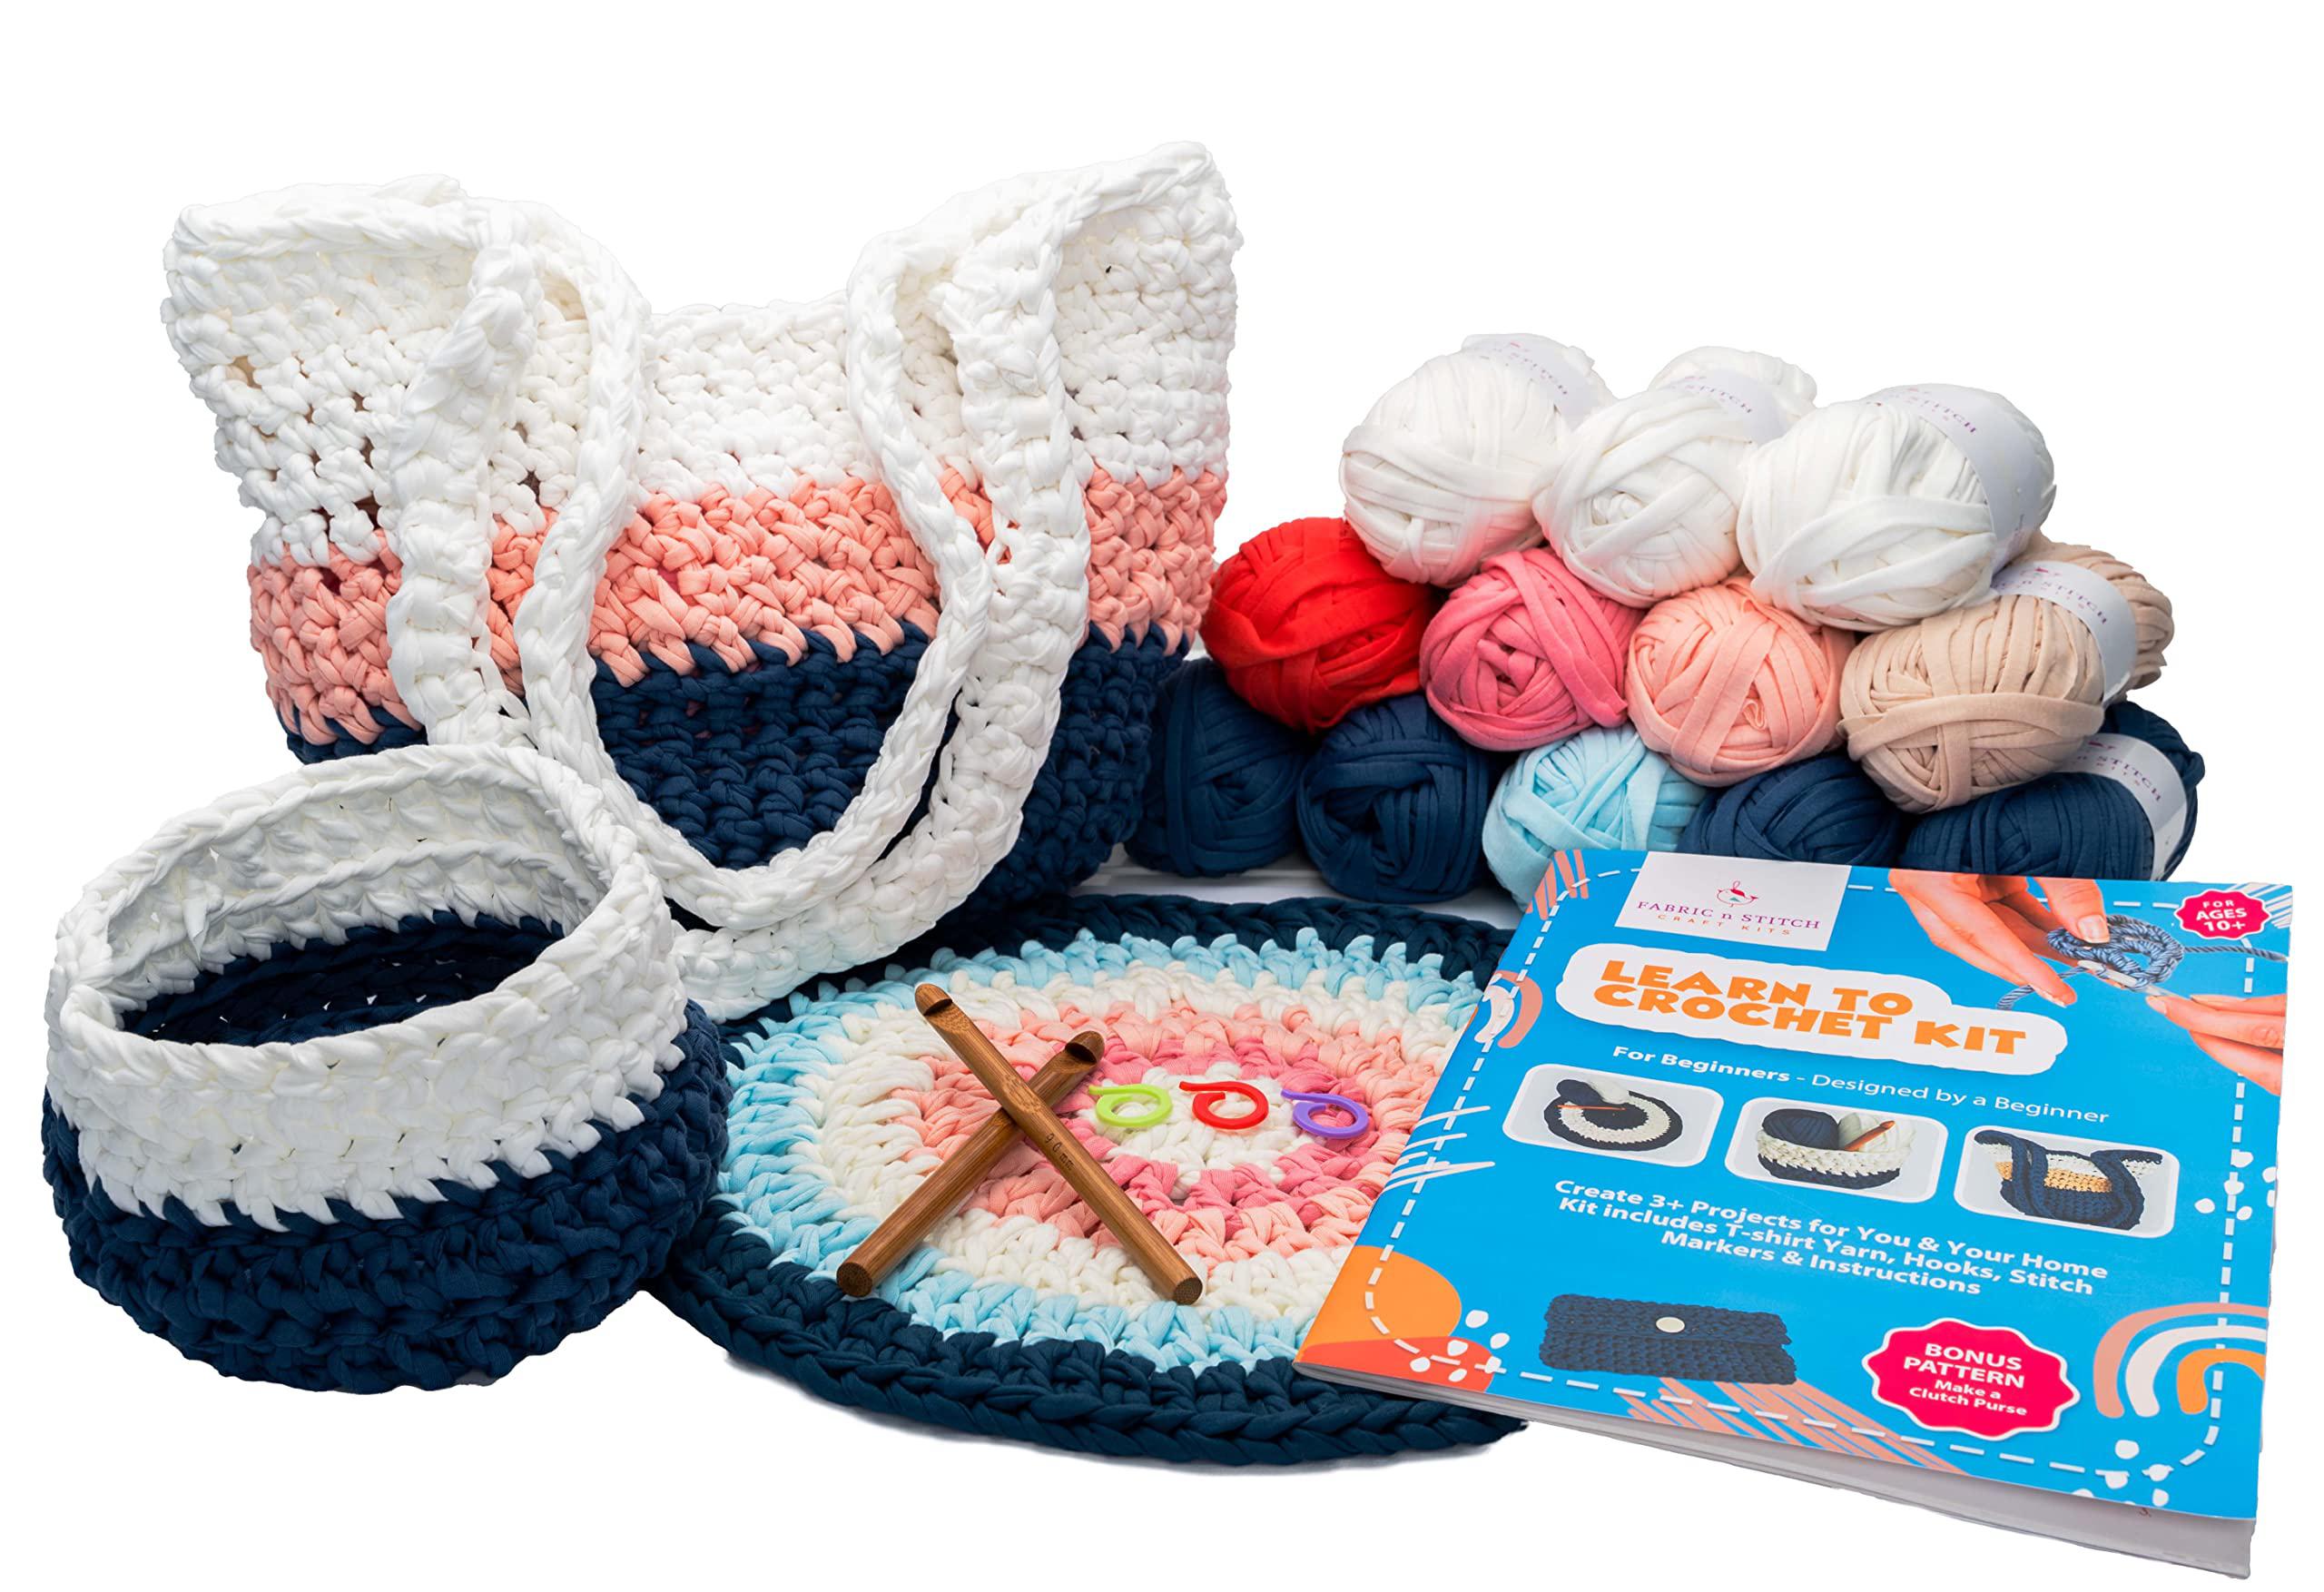 fabric n stitch beginner crochet kit. learn to crochet & create 4 bohemian  style designs with